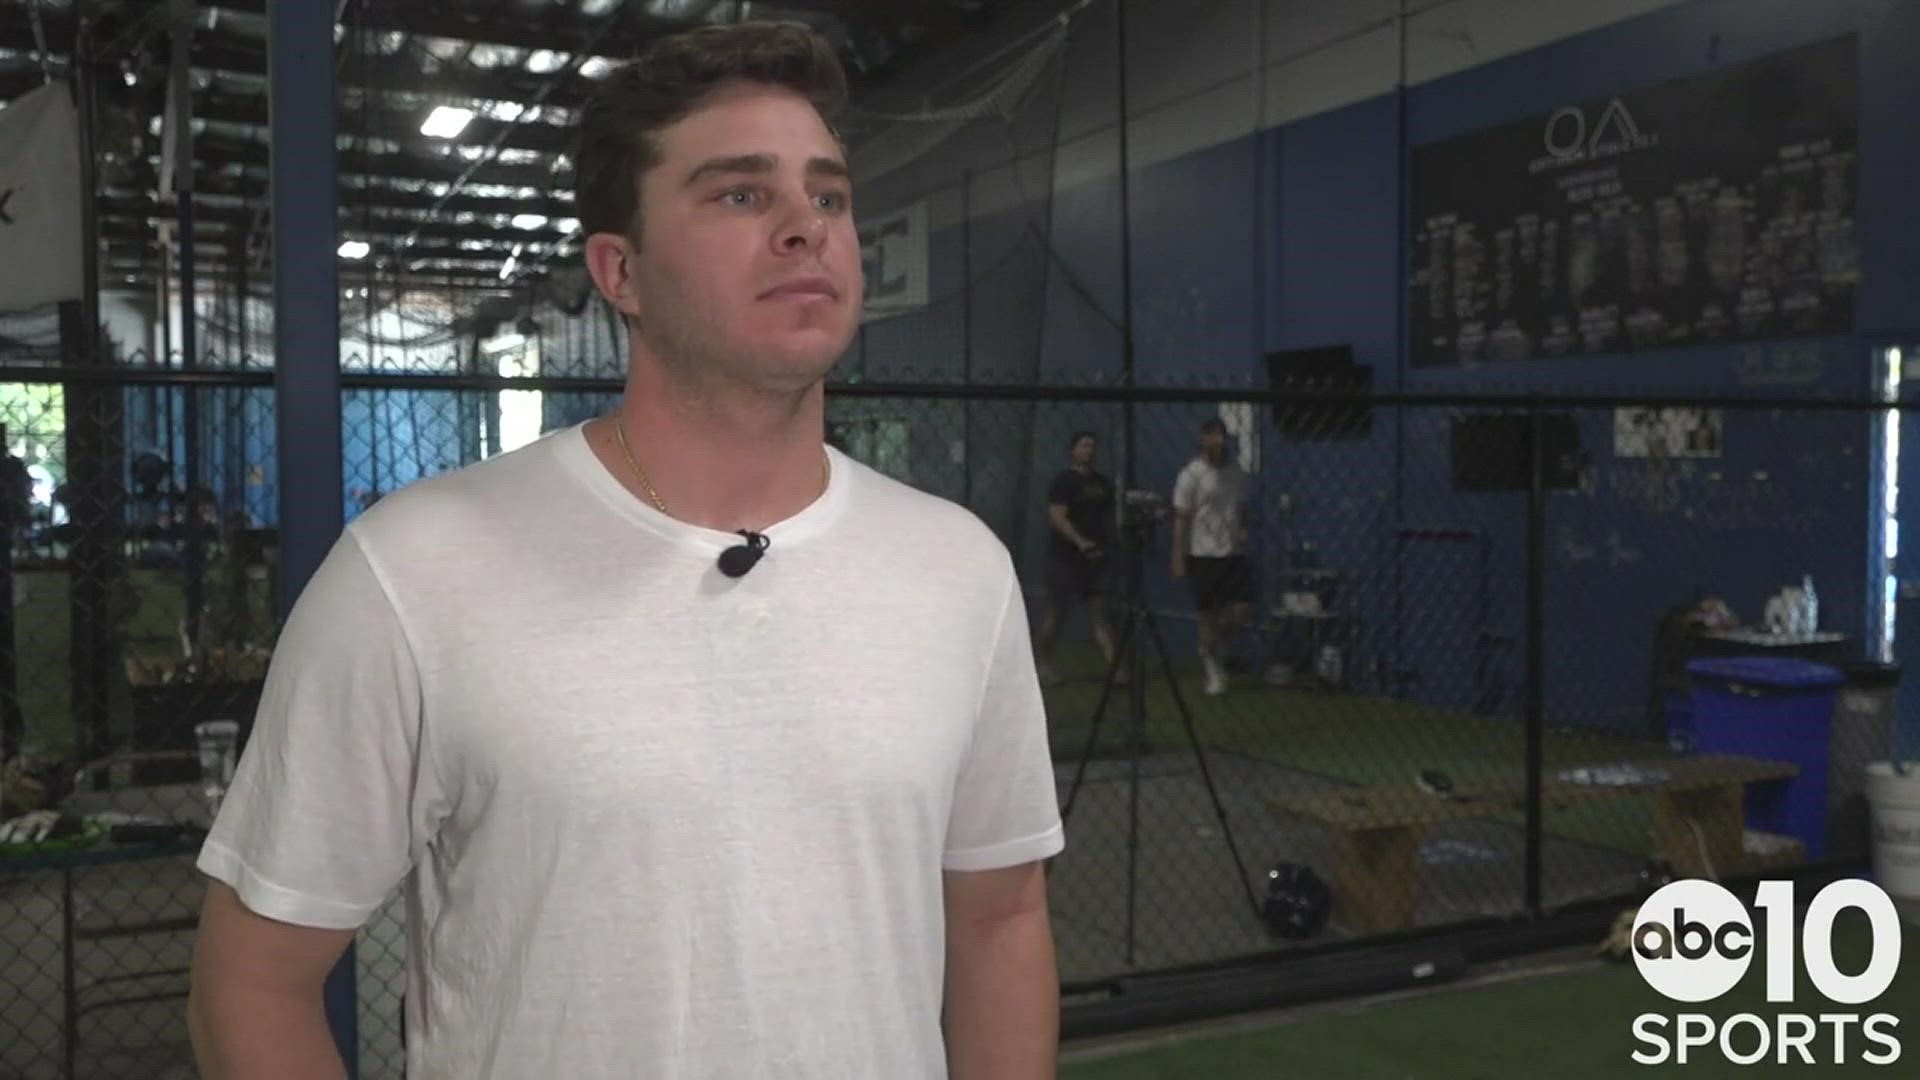 San Francisco Giants pitcher Sammy Long talks with ABC10's Sean Cunningham about the team's success & his resilient journey from Sacramento to Major League Baseball.